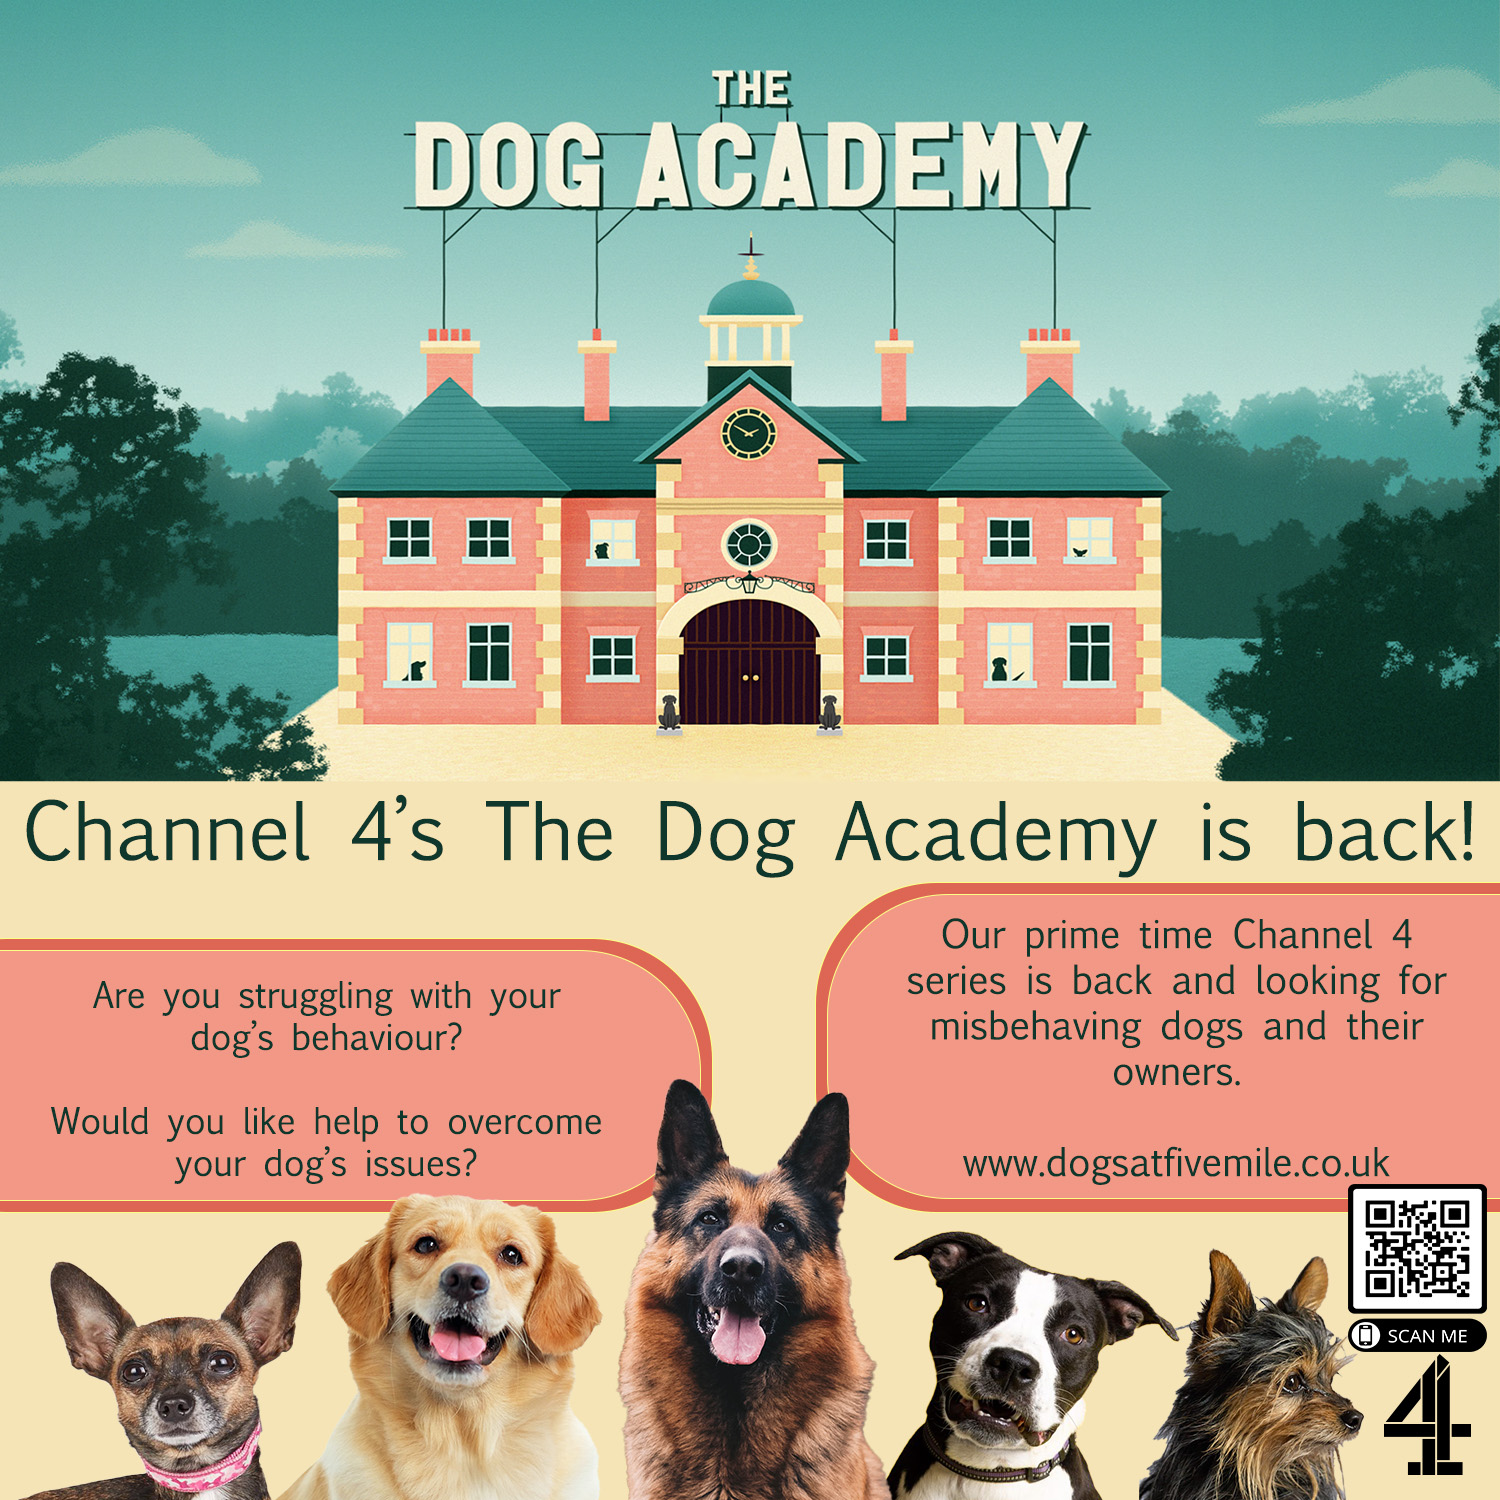 The Dog Academy. Channel 4s The Dog Academy is back! Are you struggling with your  dog's behaviour? Would you like help to overcome your dog's issues? Our prime time Channel 4 series is back and looking for misbehaving dogs and their owners. www.dogsatfivemile.co.uk